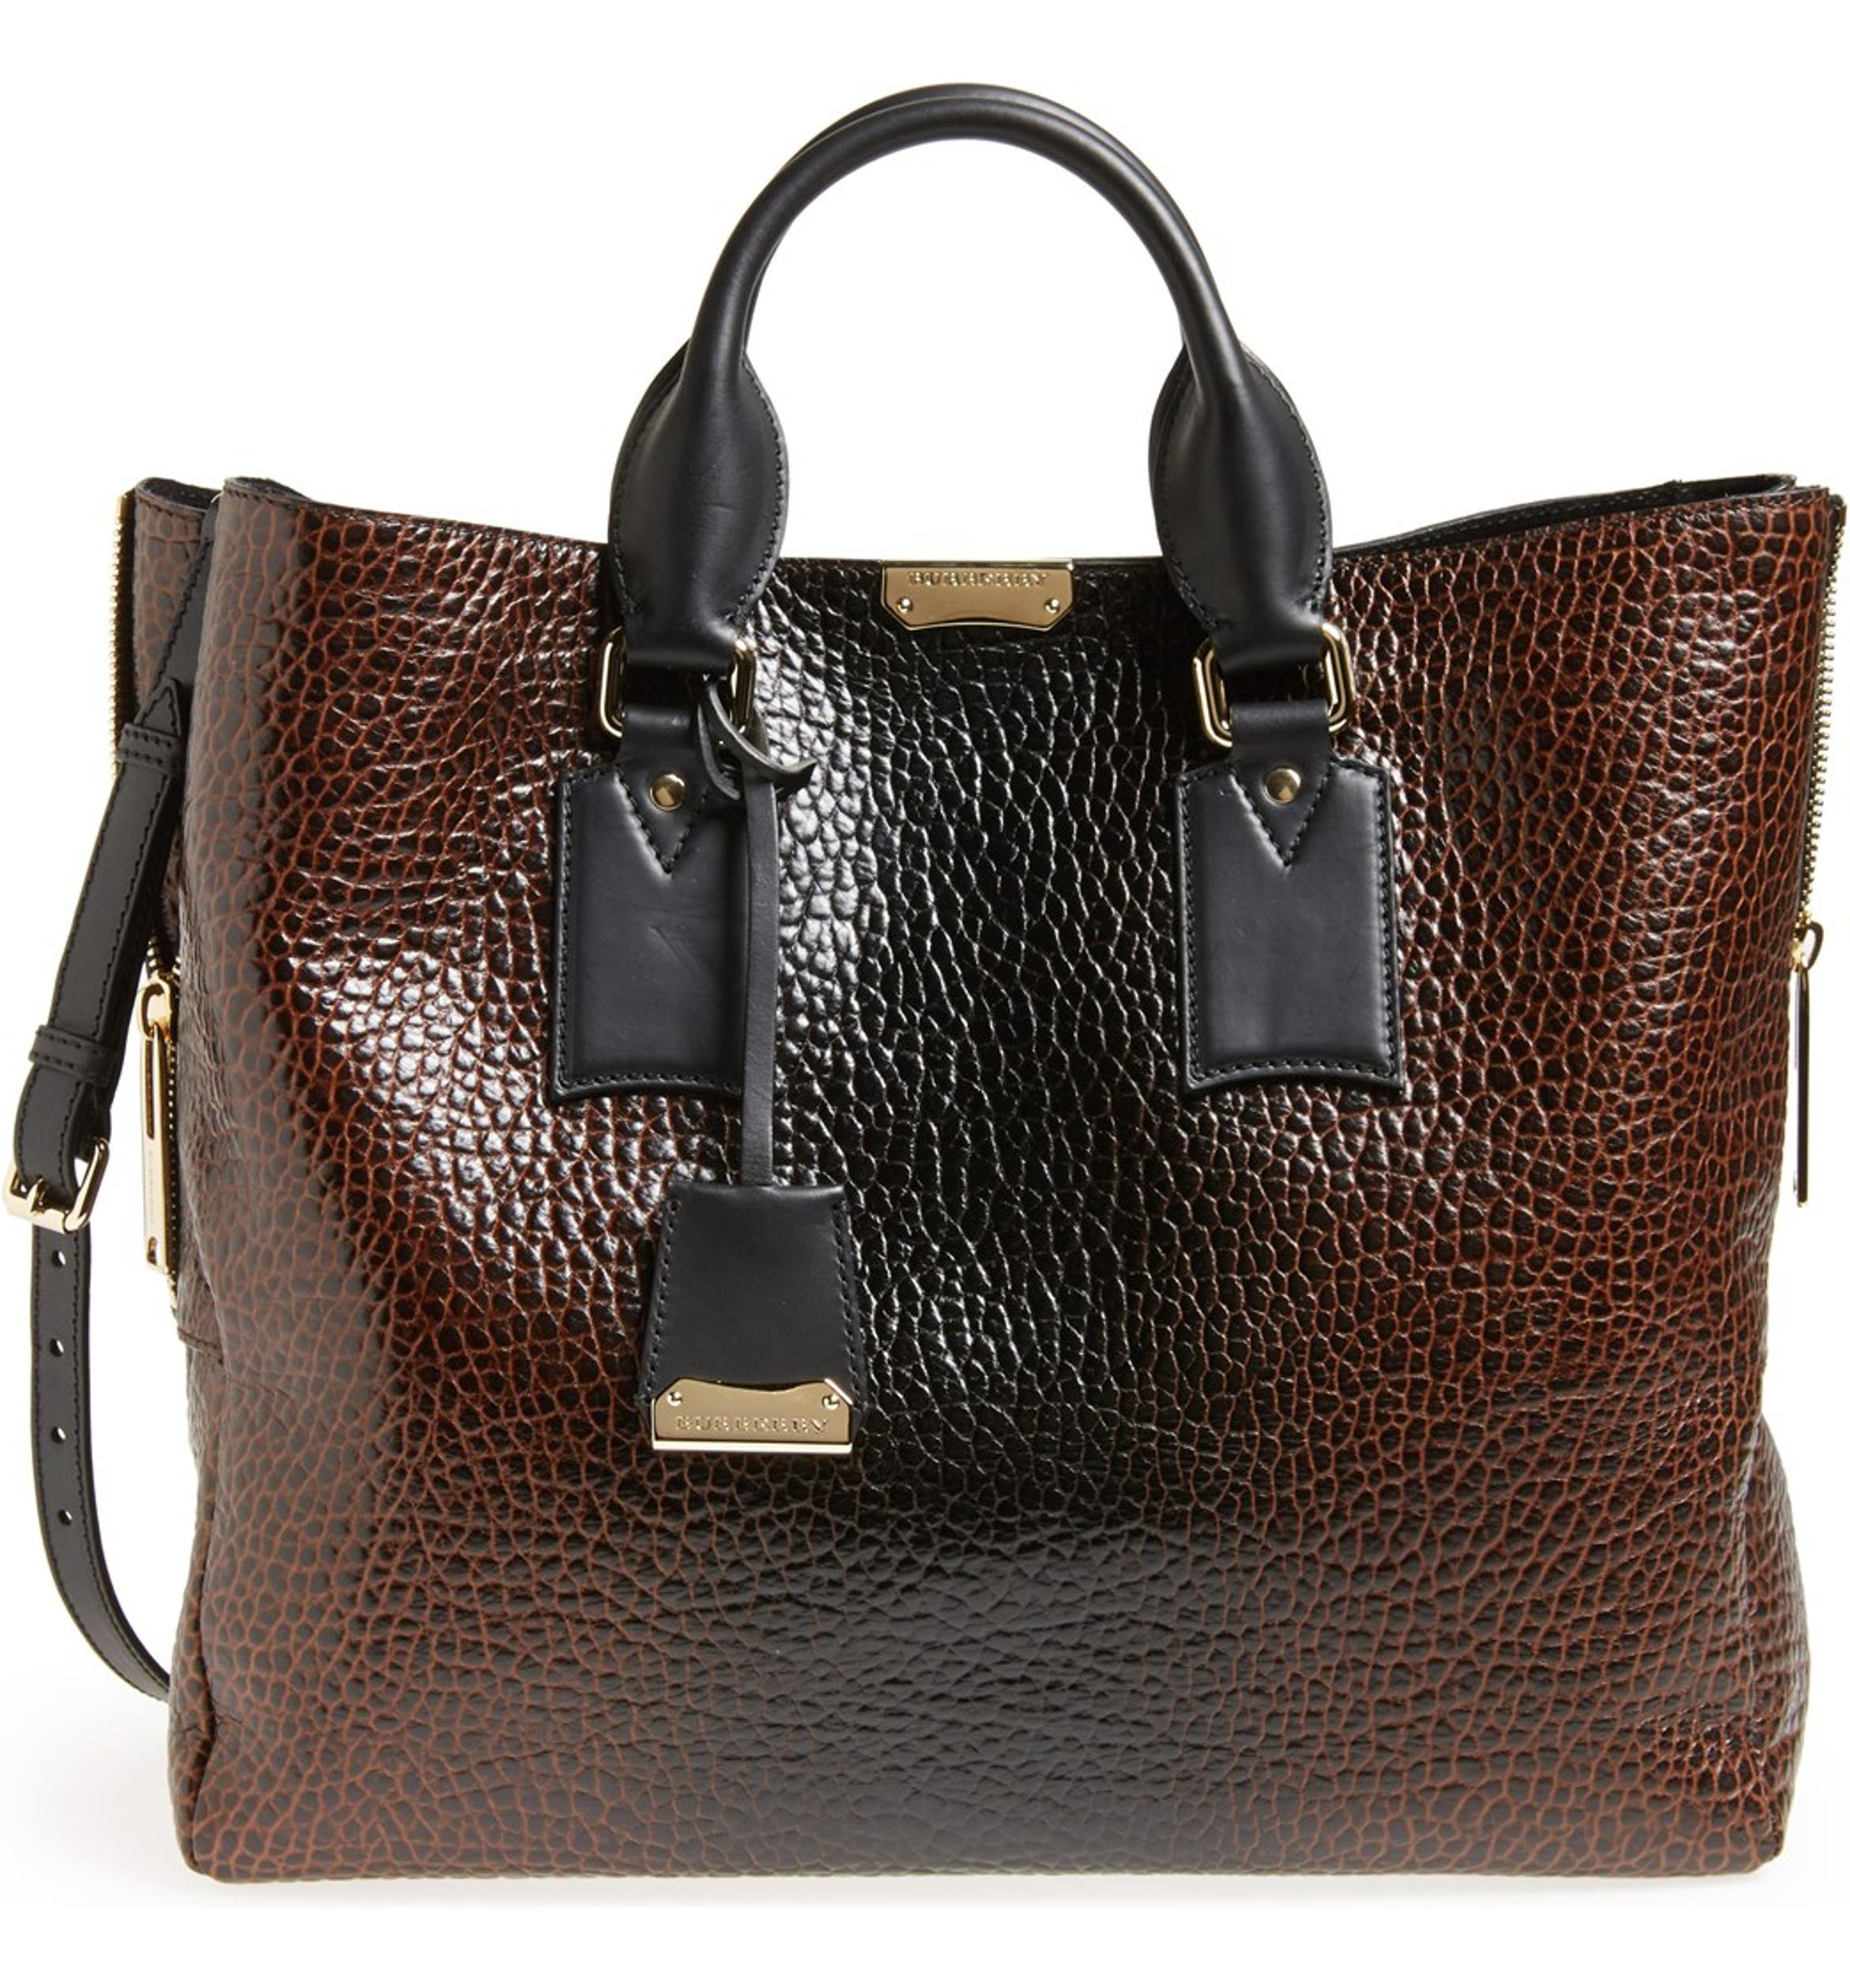 Burberry 'Large Callaghan' Leather Tote | Nordstrom